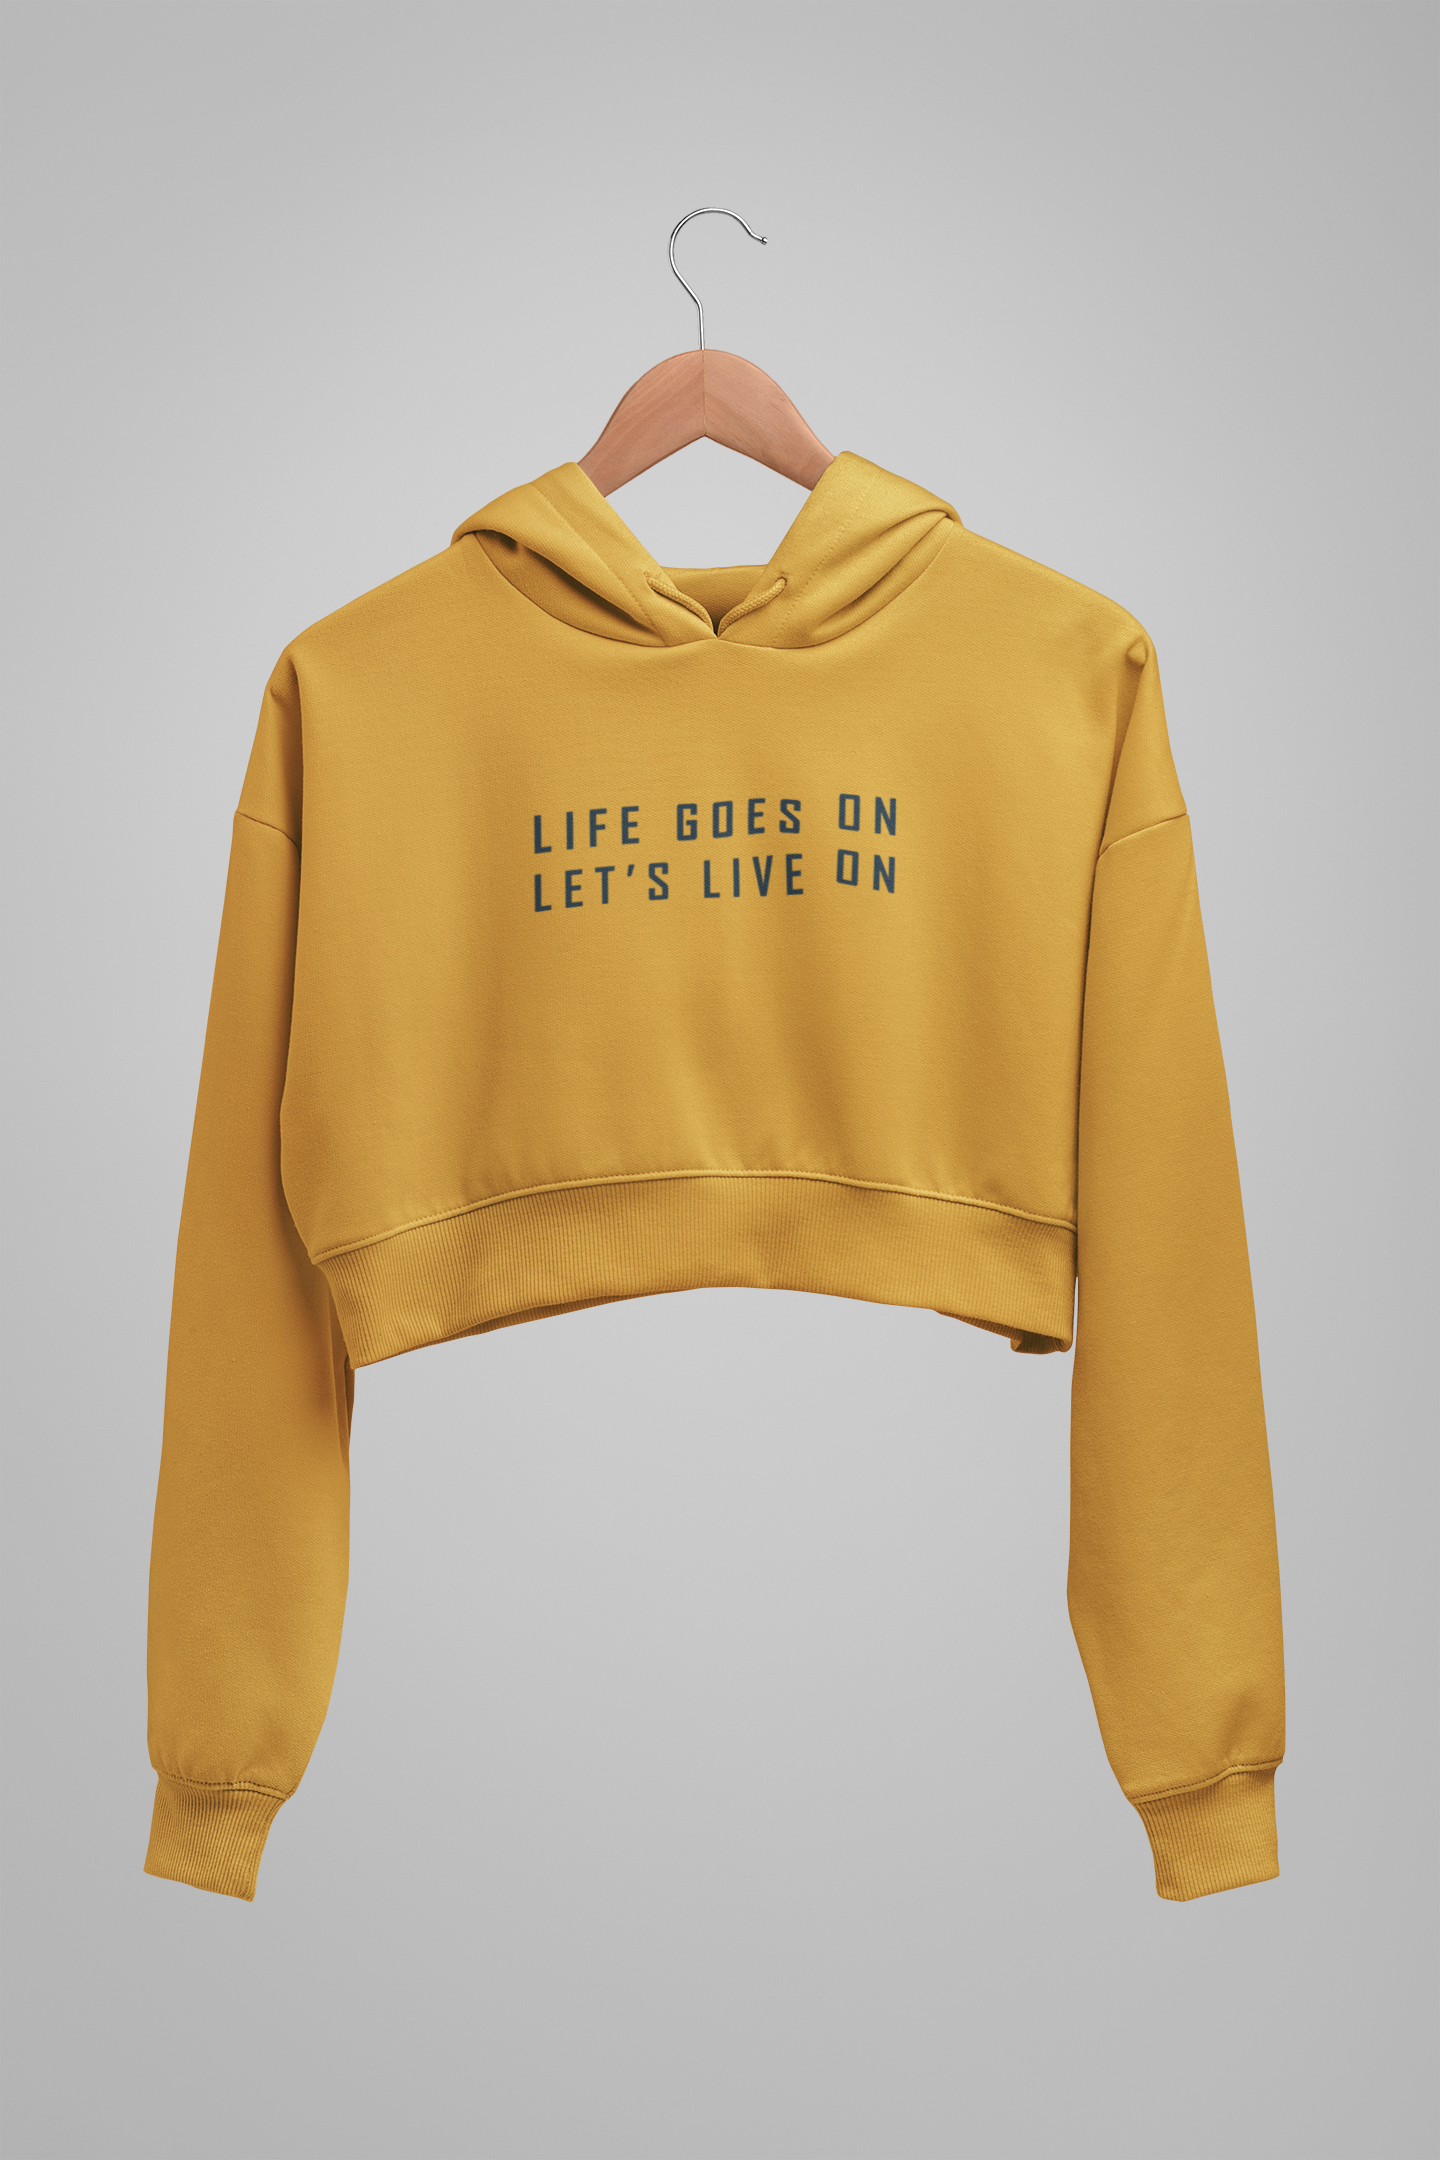 Life Goes On, Let's Live On : BTS - Winter Crop Hoodies